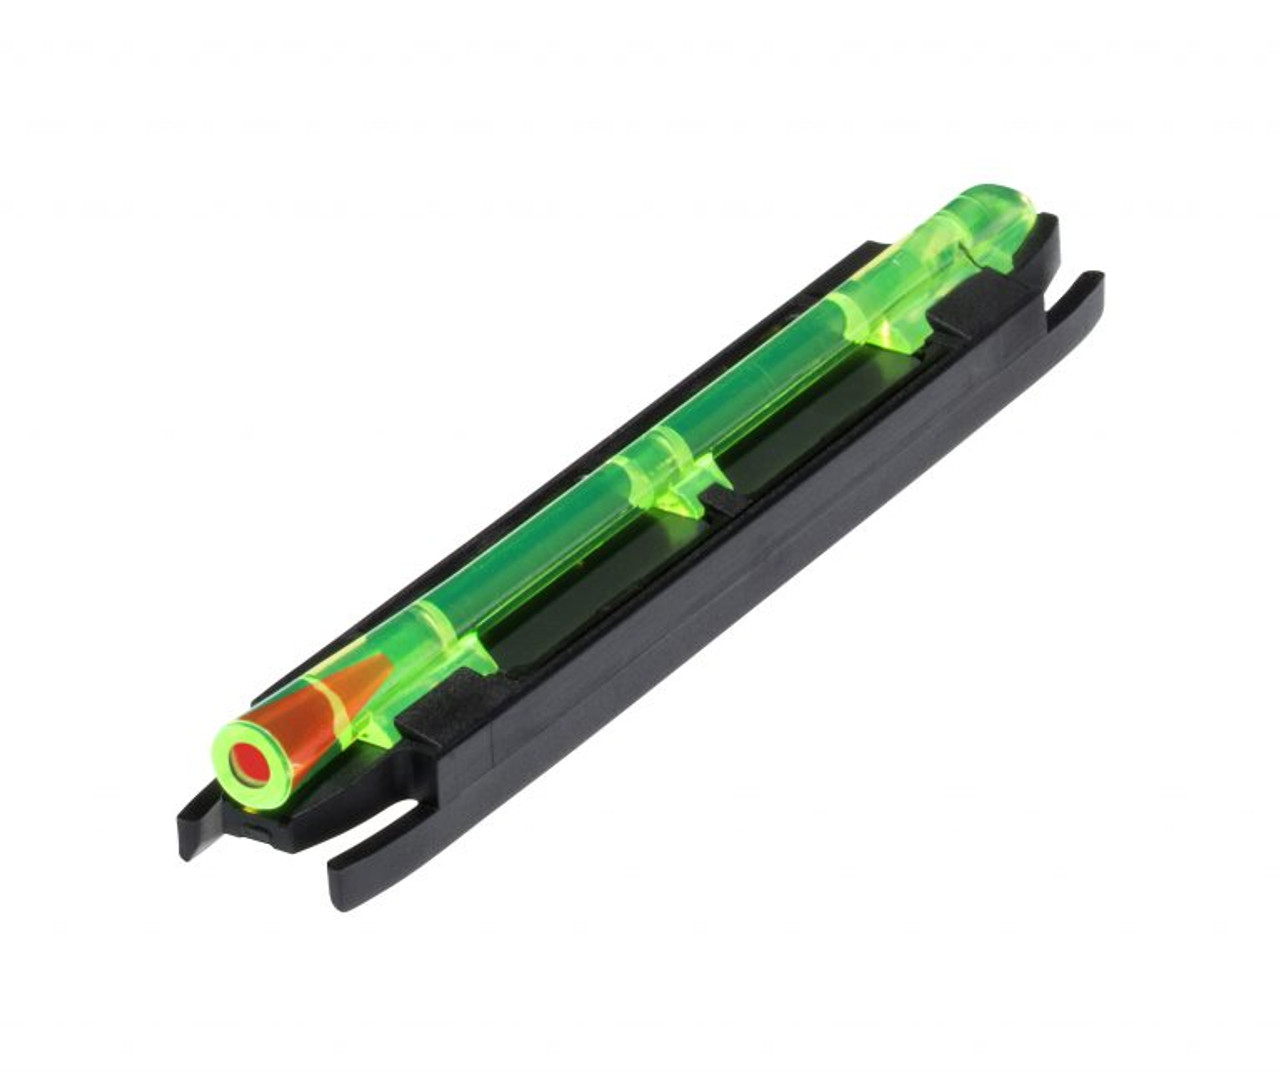 When versatility is vital, the M-Series line of magnetic sights has you covered. The snap-on magnetic base is available in four different sizes to fit a wide variety of rib widths. All M-Series sights come with green, red, and the uniquely HIVIZ two-toned LitePipe. Pair your favorite shotgun with one of our favorite magnetic sights.

Wide Model (M400) fits ribs from .328″ to .437″ (21/64″ to 7/16″) (8.3mm to 11.1mm)

LitePipe Colors: Green 0.135, red 0.175, red 0.135, two tone 0.175